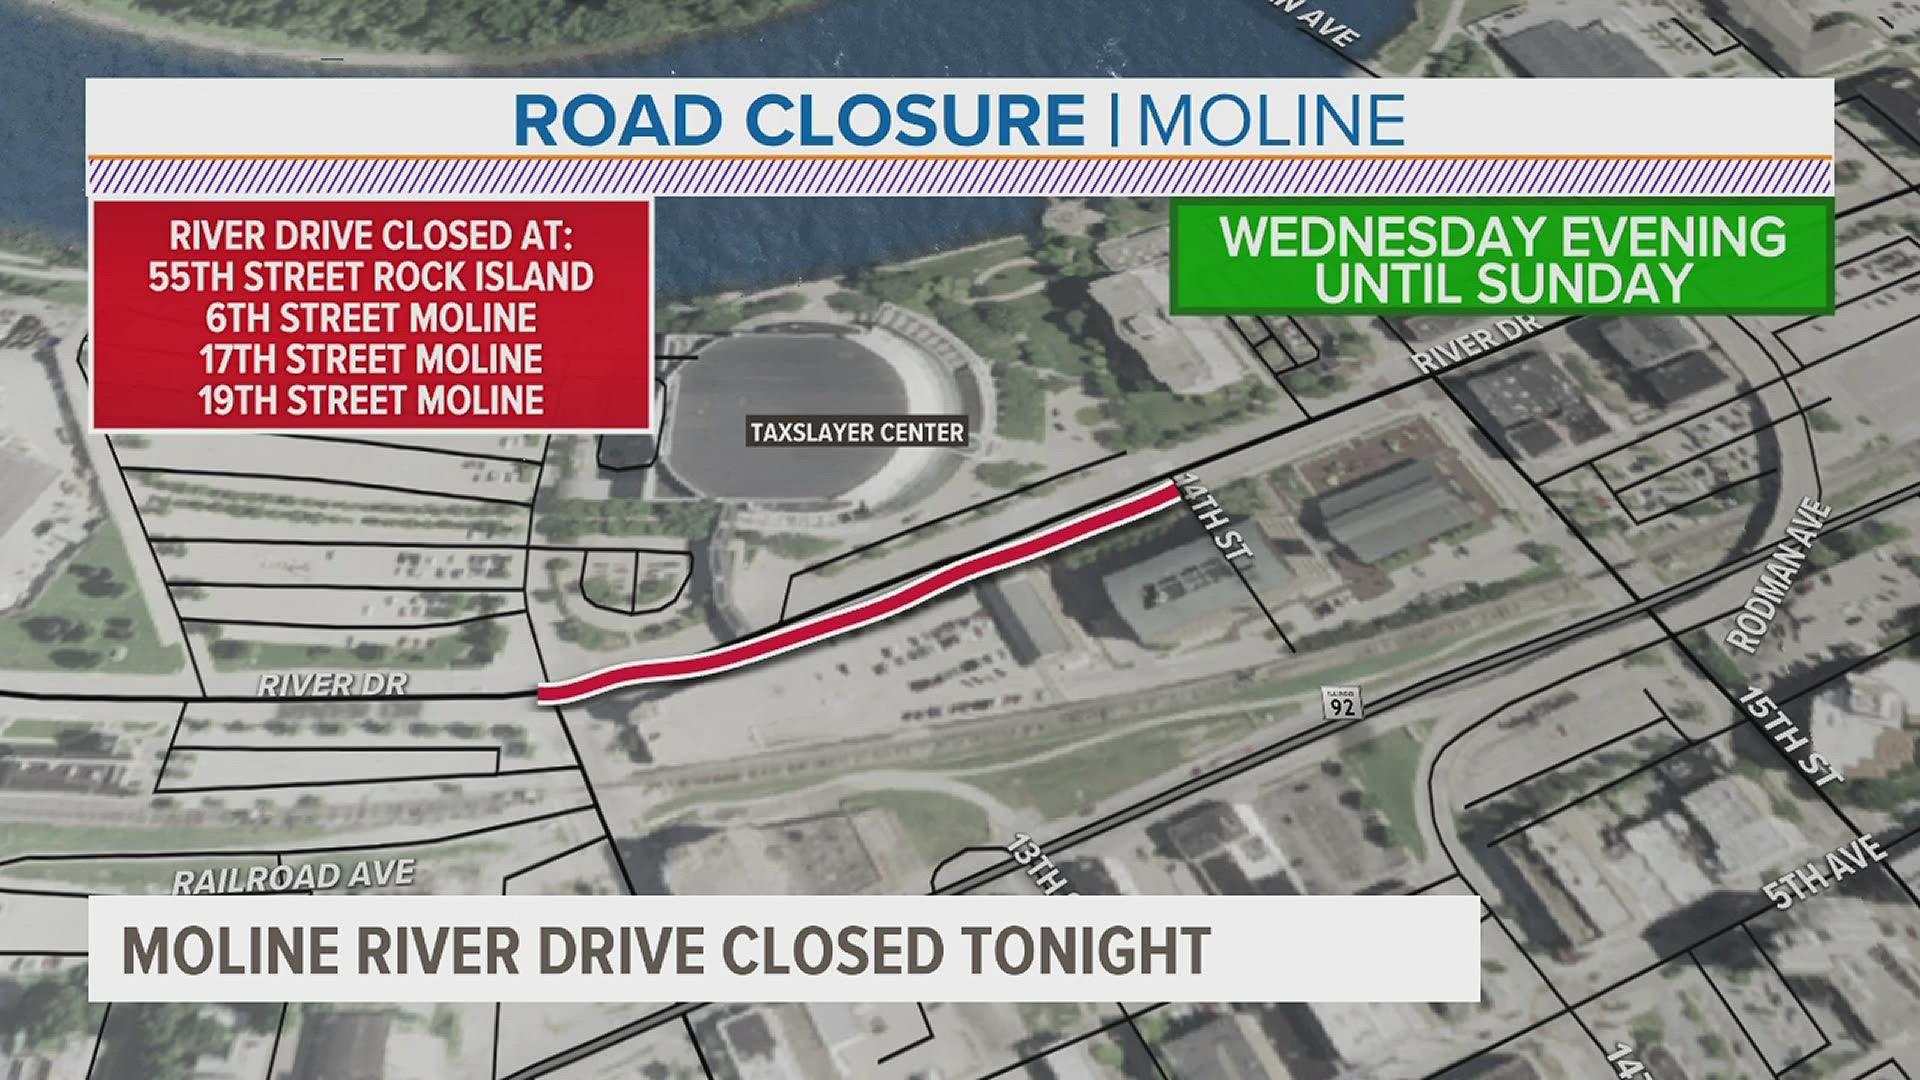 River Drive will be closed between 12th and 15th streets through Sunday for the celebration of Moline's 150th anniversary.